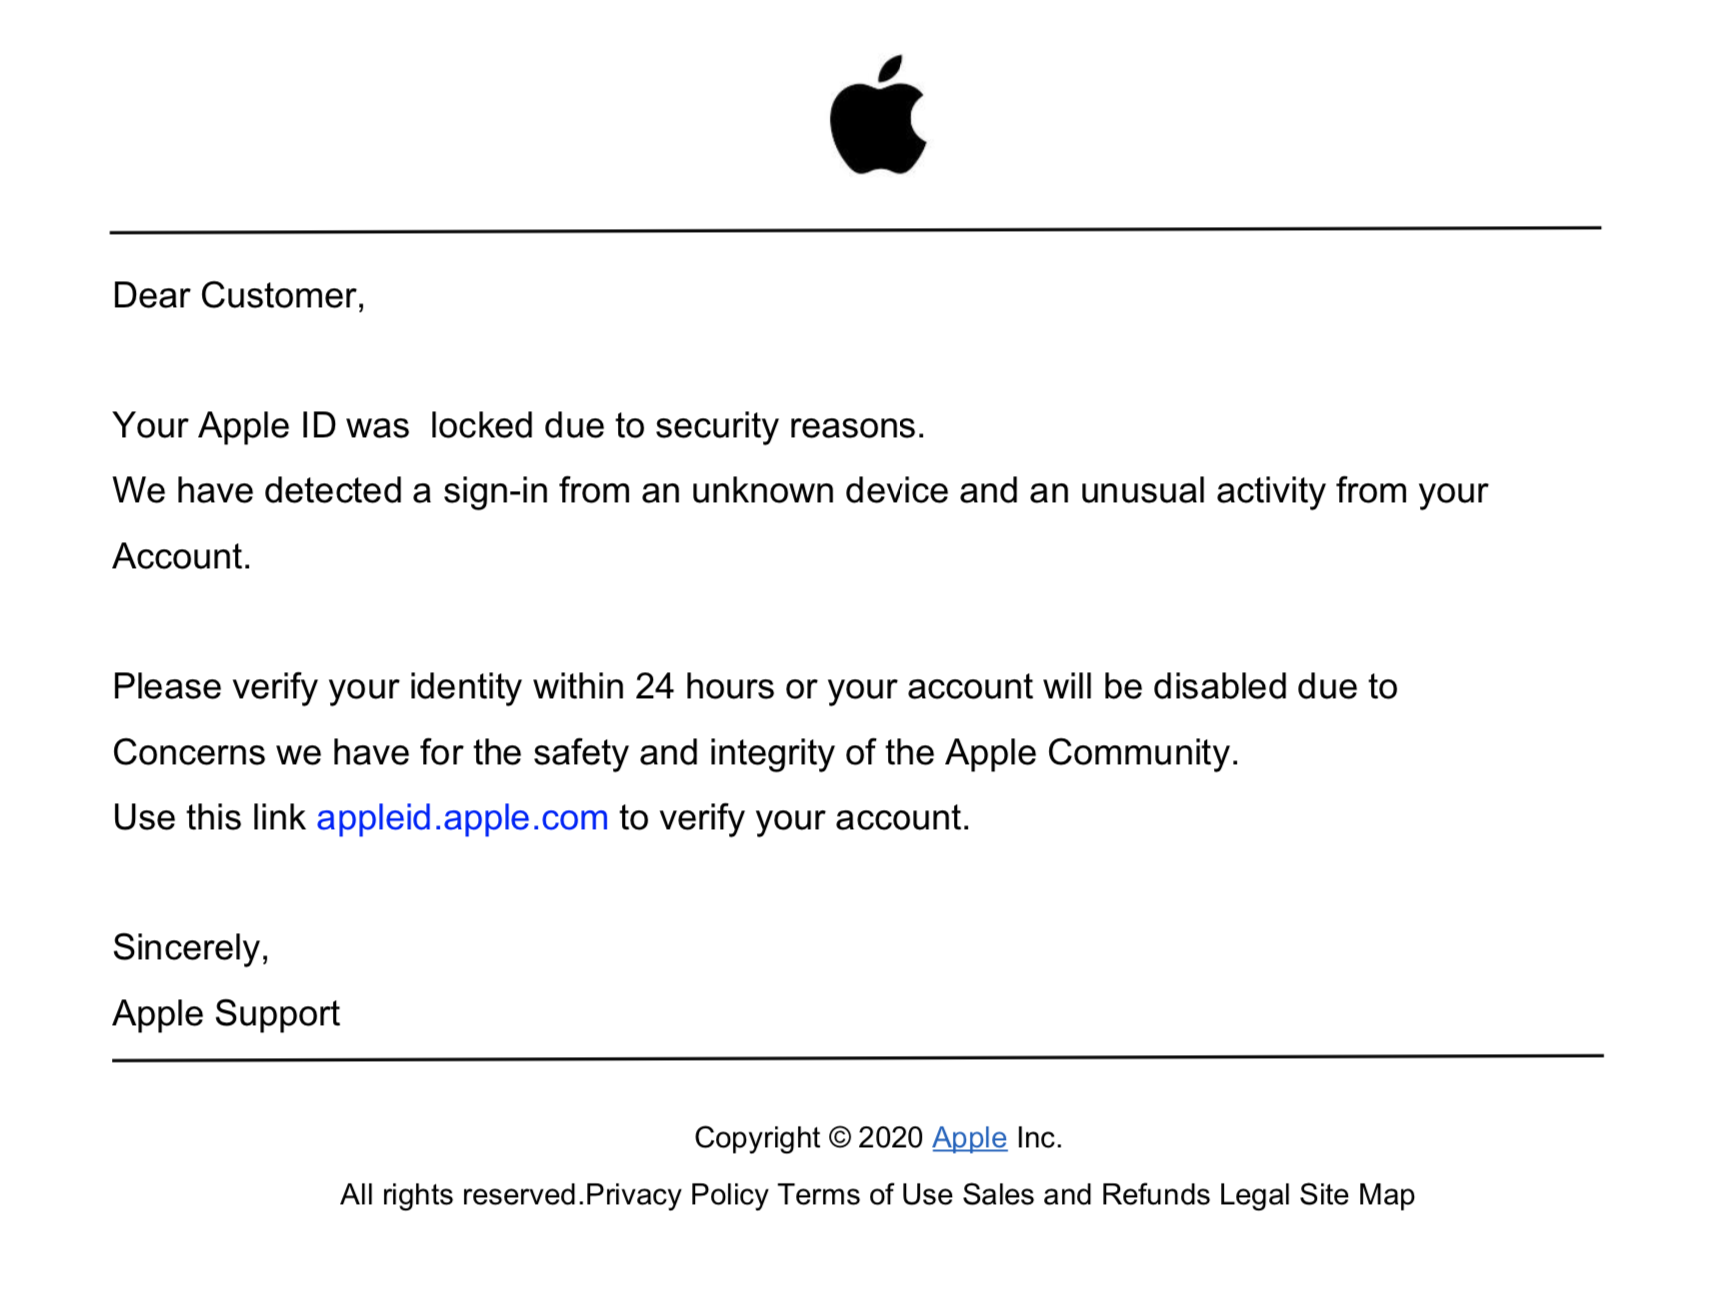 A phishing PDF purporting to be from Apple. It reads: 